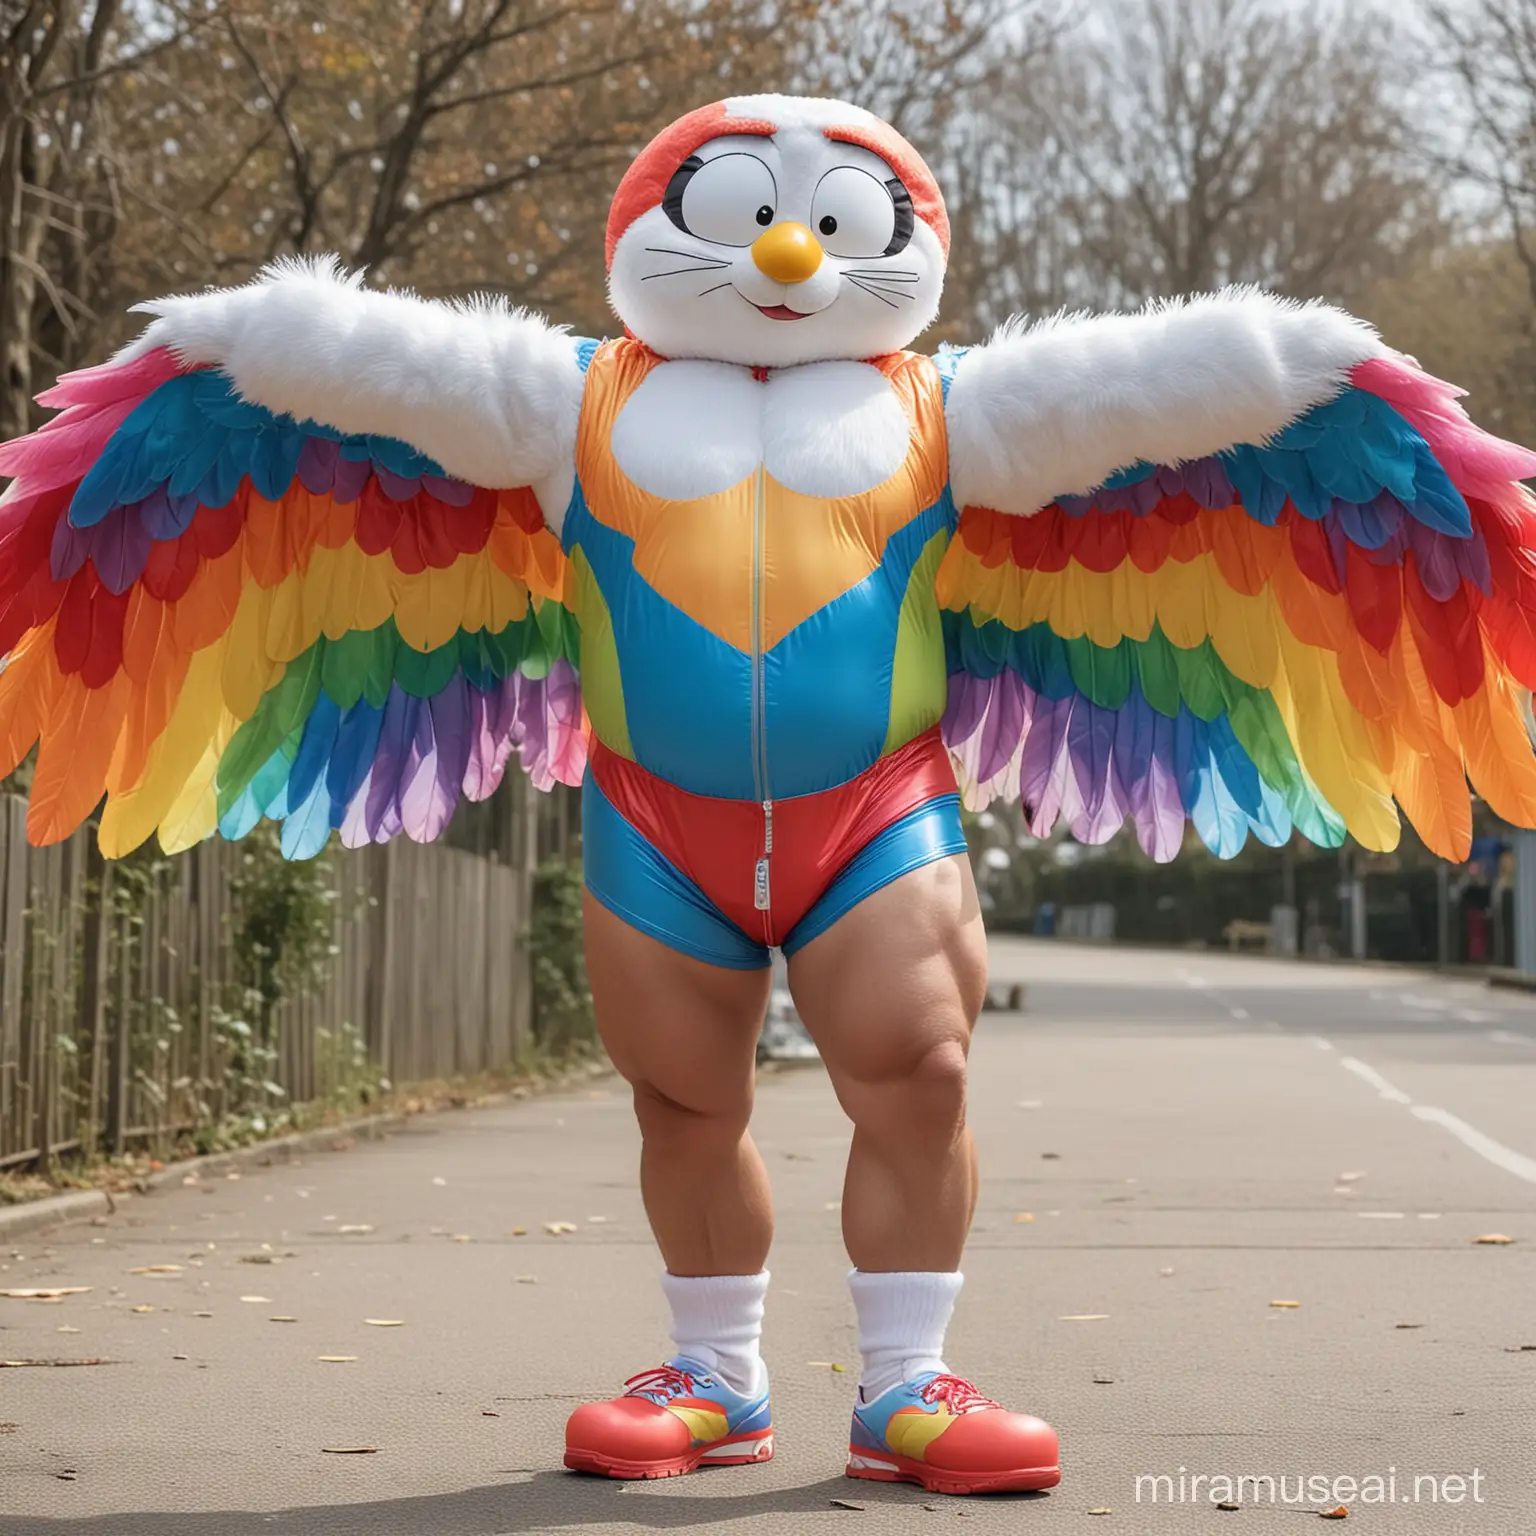 Full Body to feet Topless 40s Ultra Chunky IFBB Bodybuilder Daddy wearing Multi-Highlighter Bright Rainbow Coloured See Through Eagle Wings Shoulder Jacket Short shorts Arms Up Flexing Big Strong Arm with Doraemon